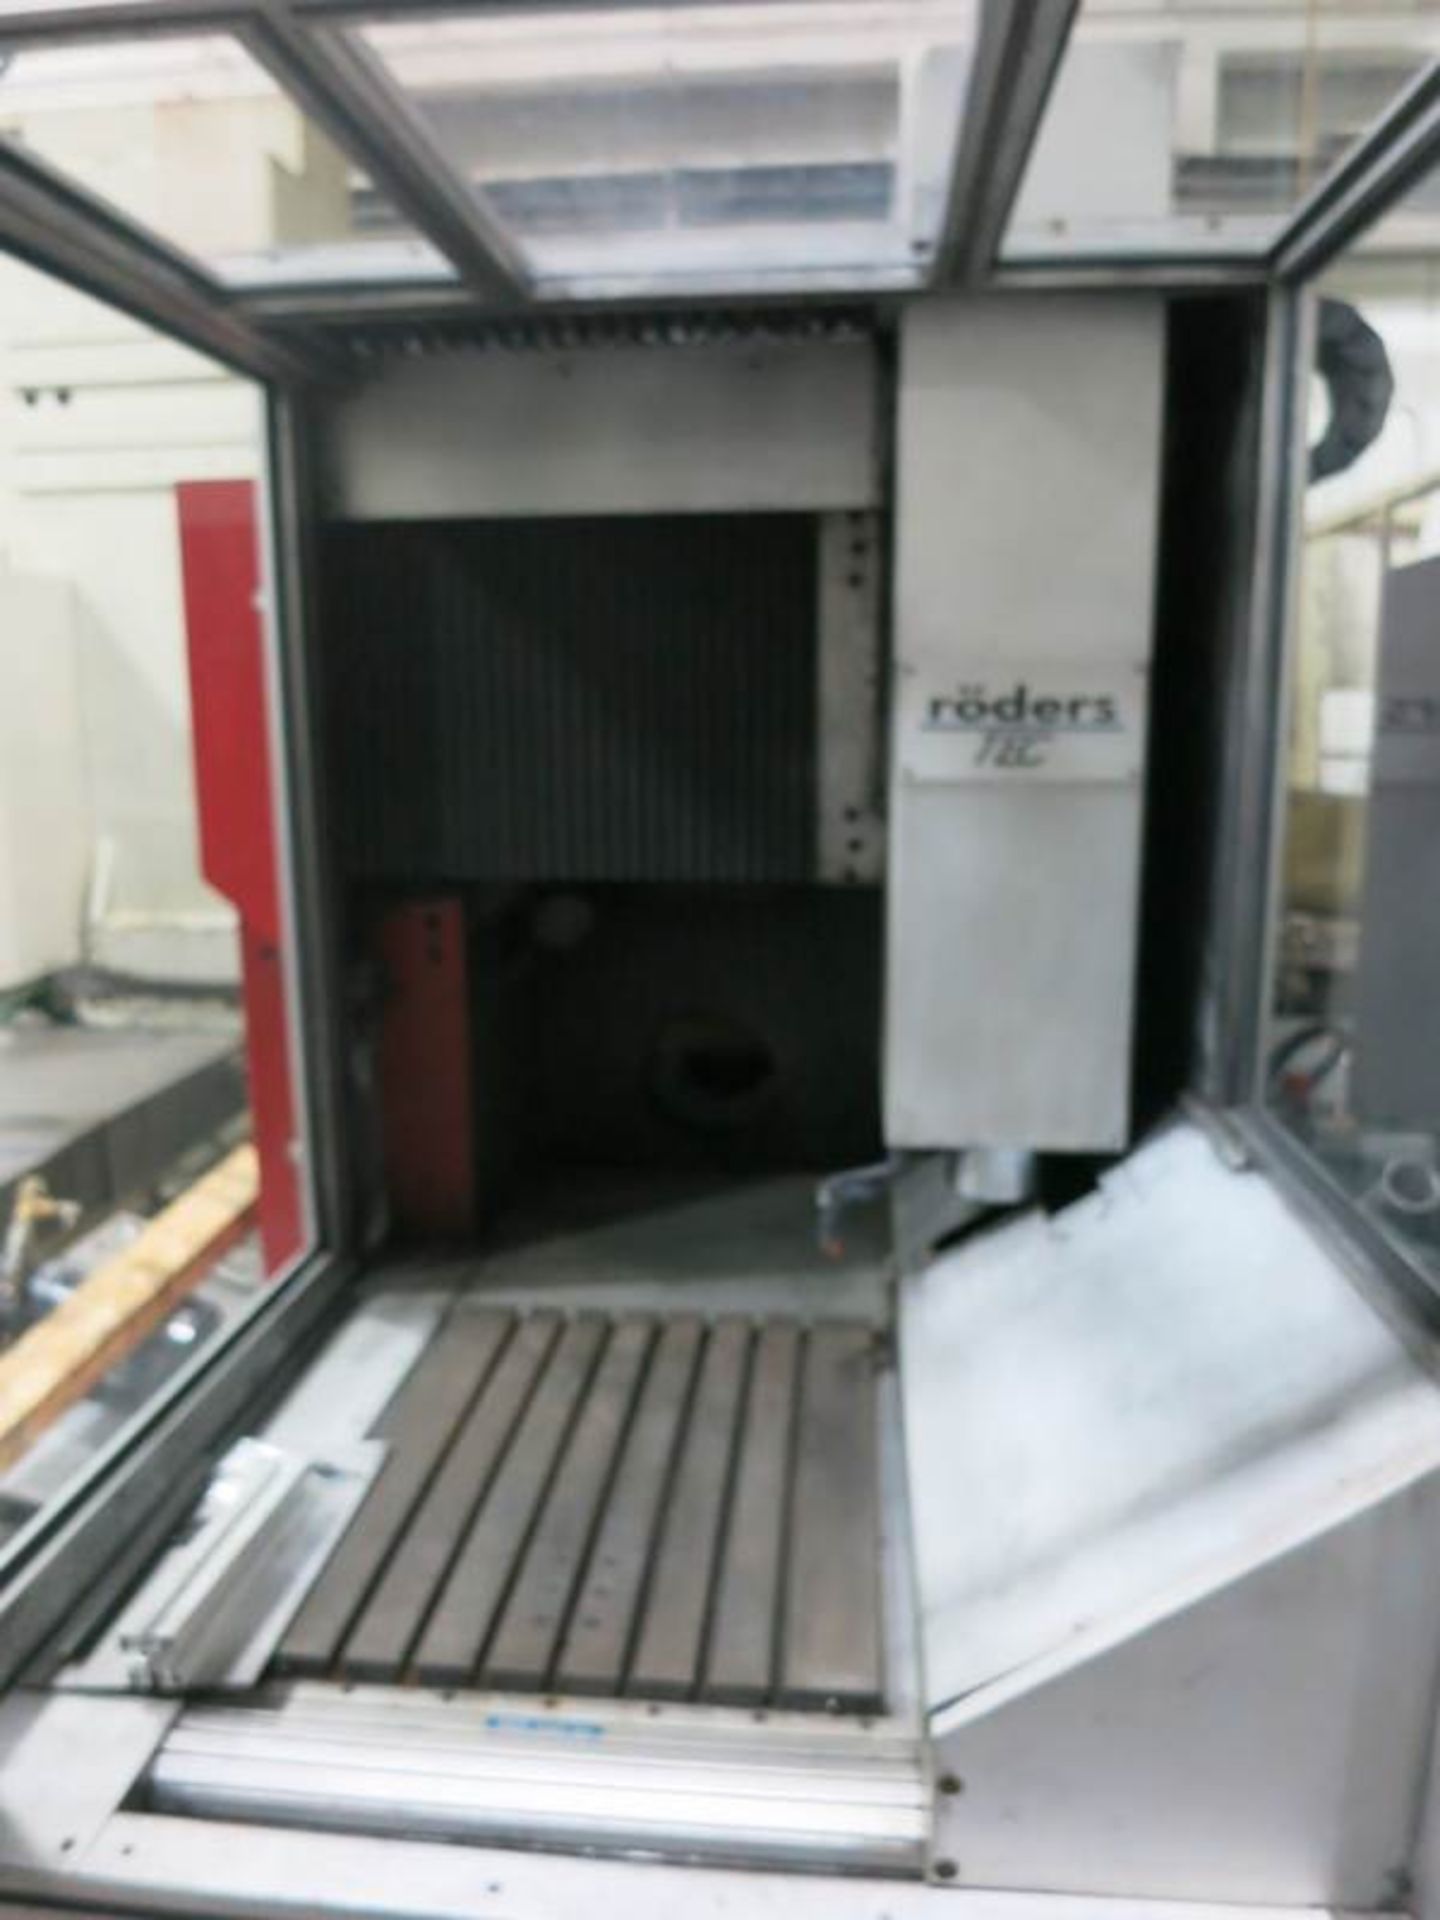 Roders Tec RFM600 CNC 3-Axis High Speed Vertical Machining Center, S/N 87995-43 - Image 4 of 9